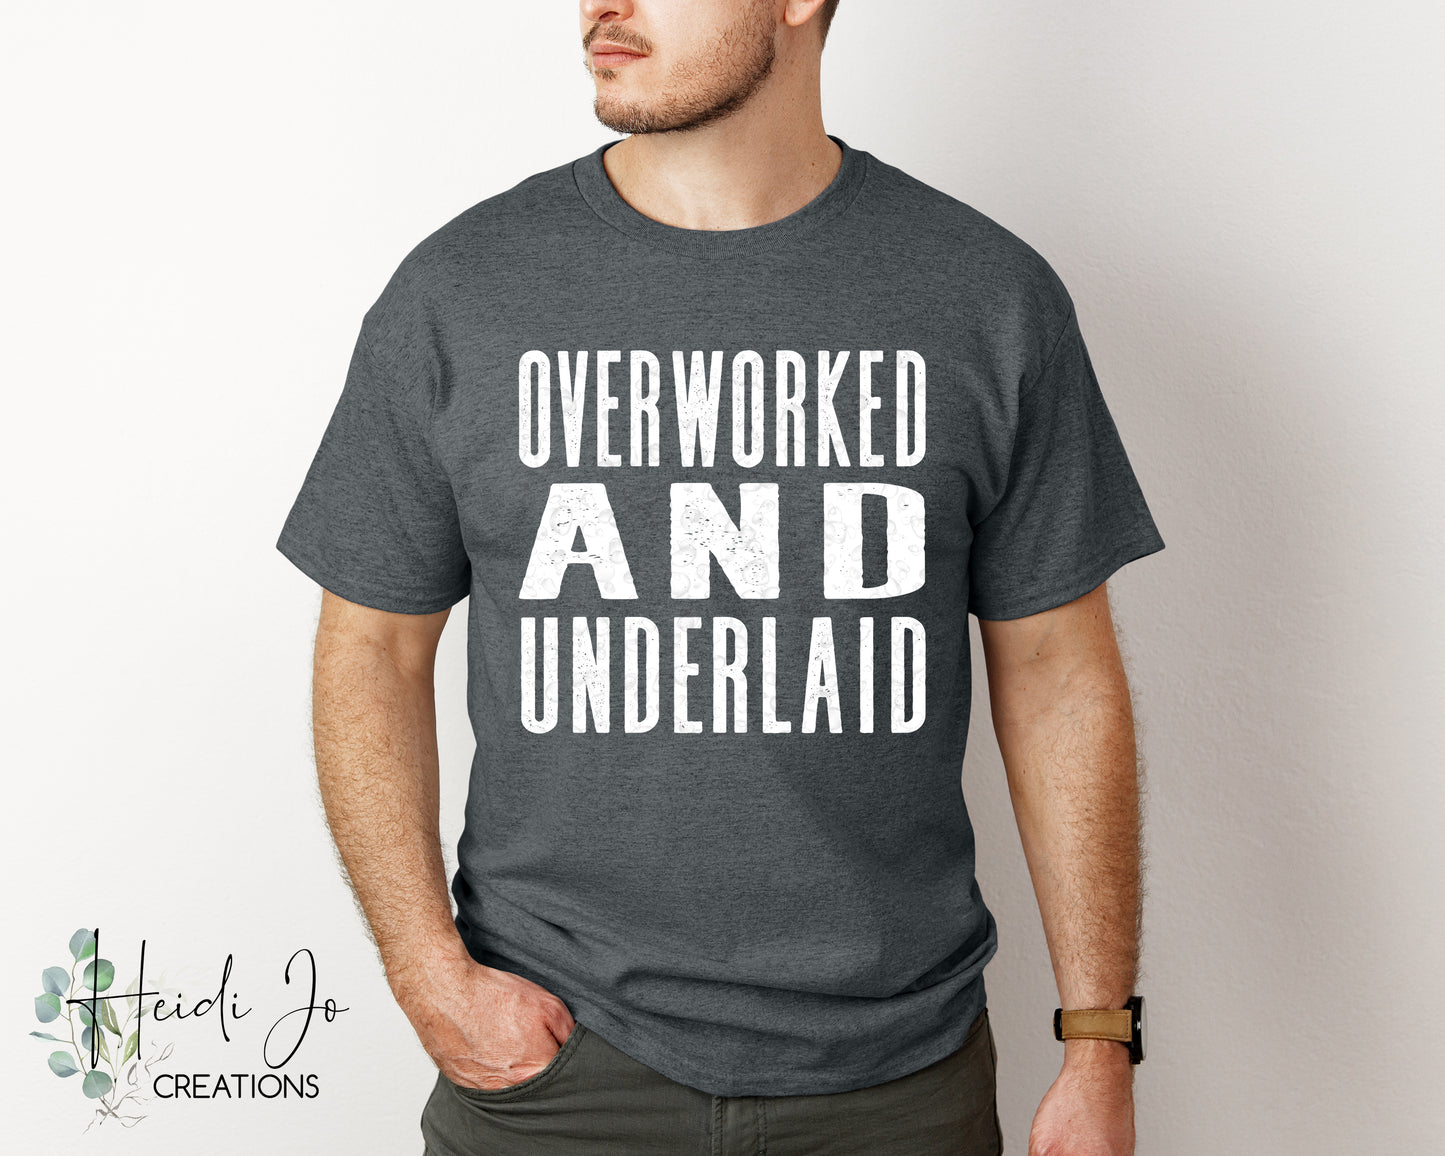 Overworked and Underlaid